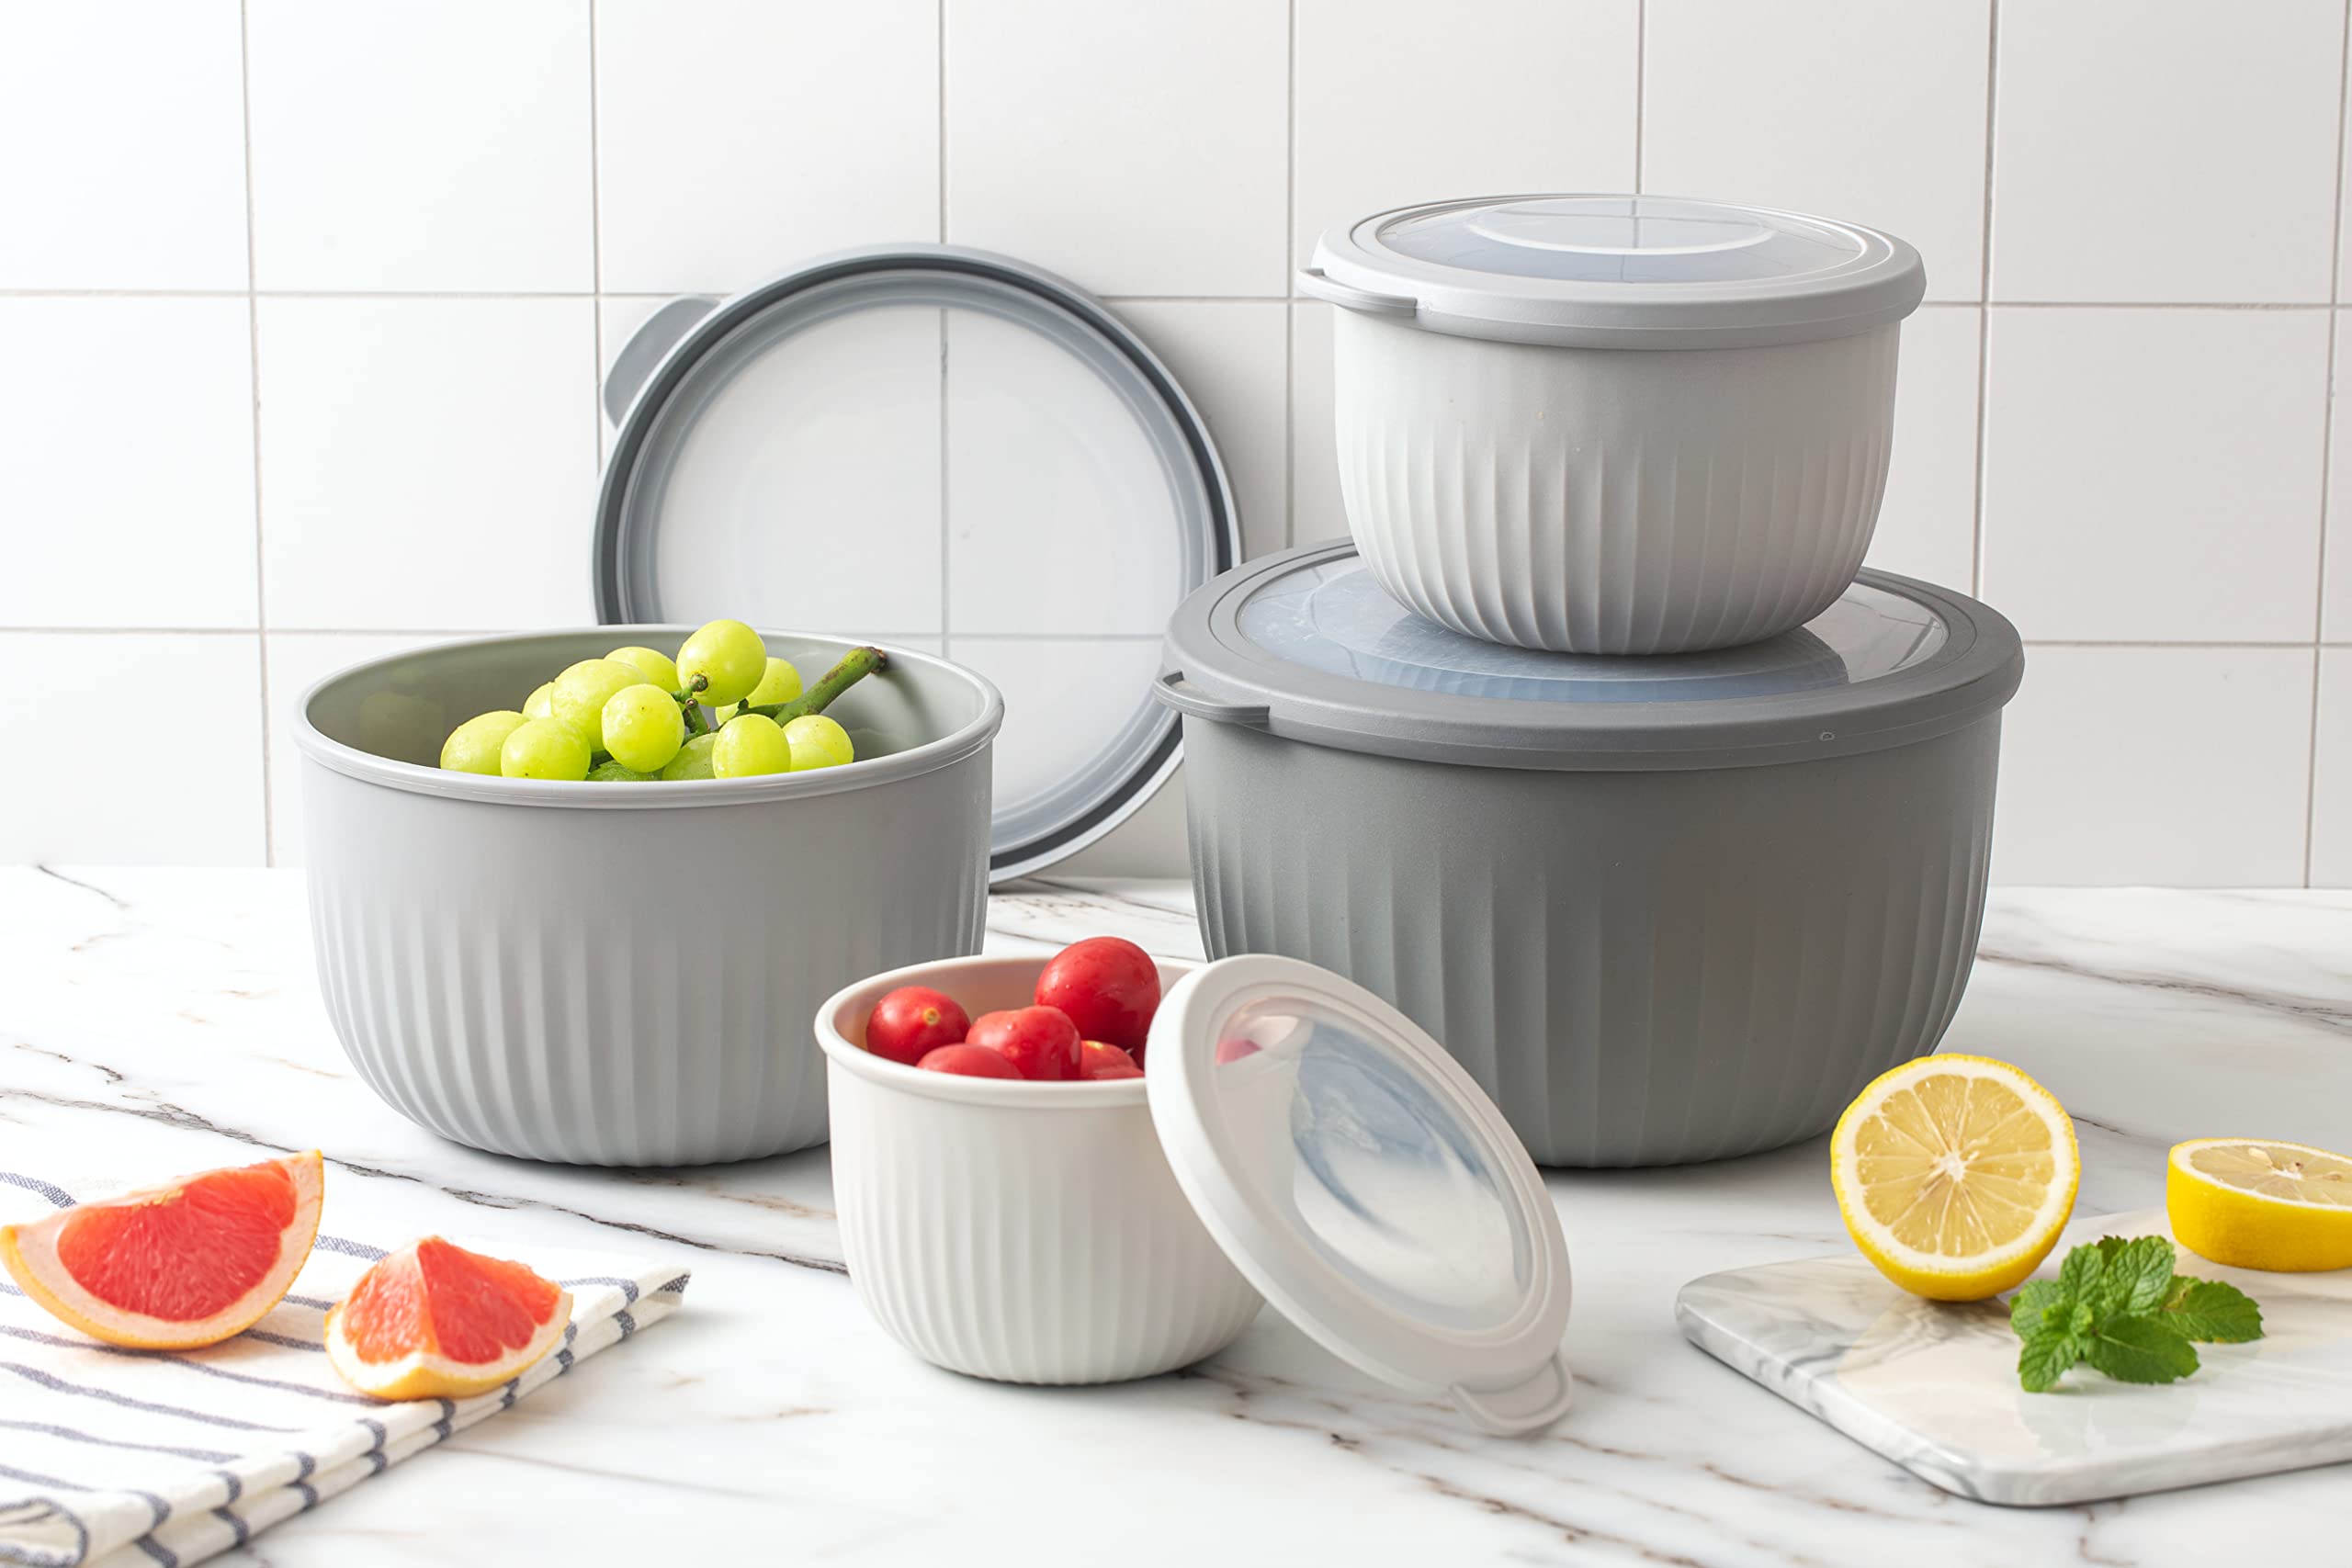 COOK WITH COLOR Prep Bowls with Lids- Deep Mixing Bowls Nesting Plastic Small Mixing Bowl Set with Lids (Grey Ombre)